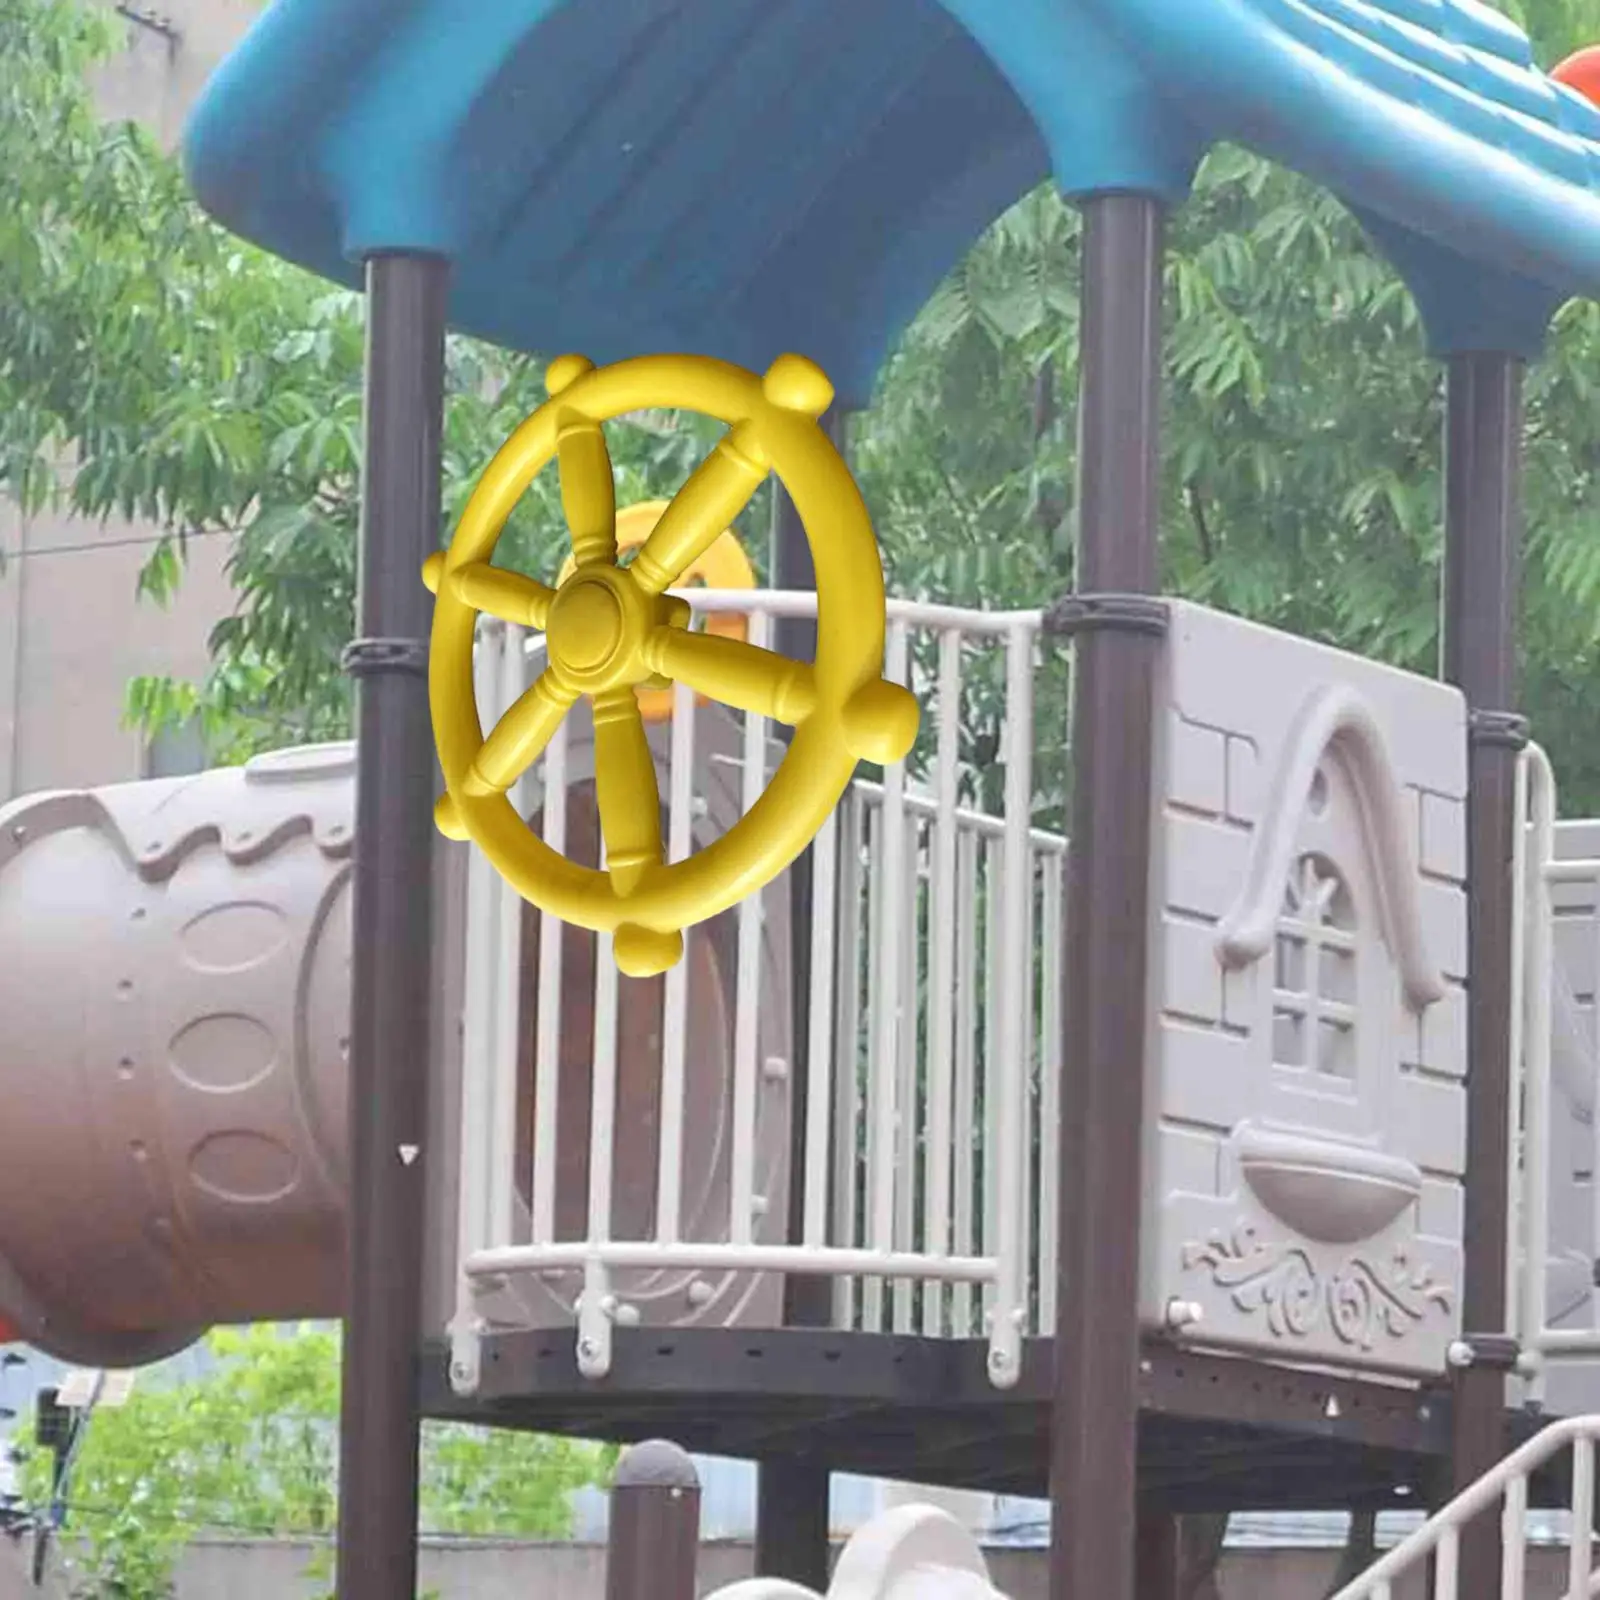 Pirate Ship Wheel Multipurpose Backyard Playset Equipment Playground Accessories for Garden Outdoor Playhouse Treehouse